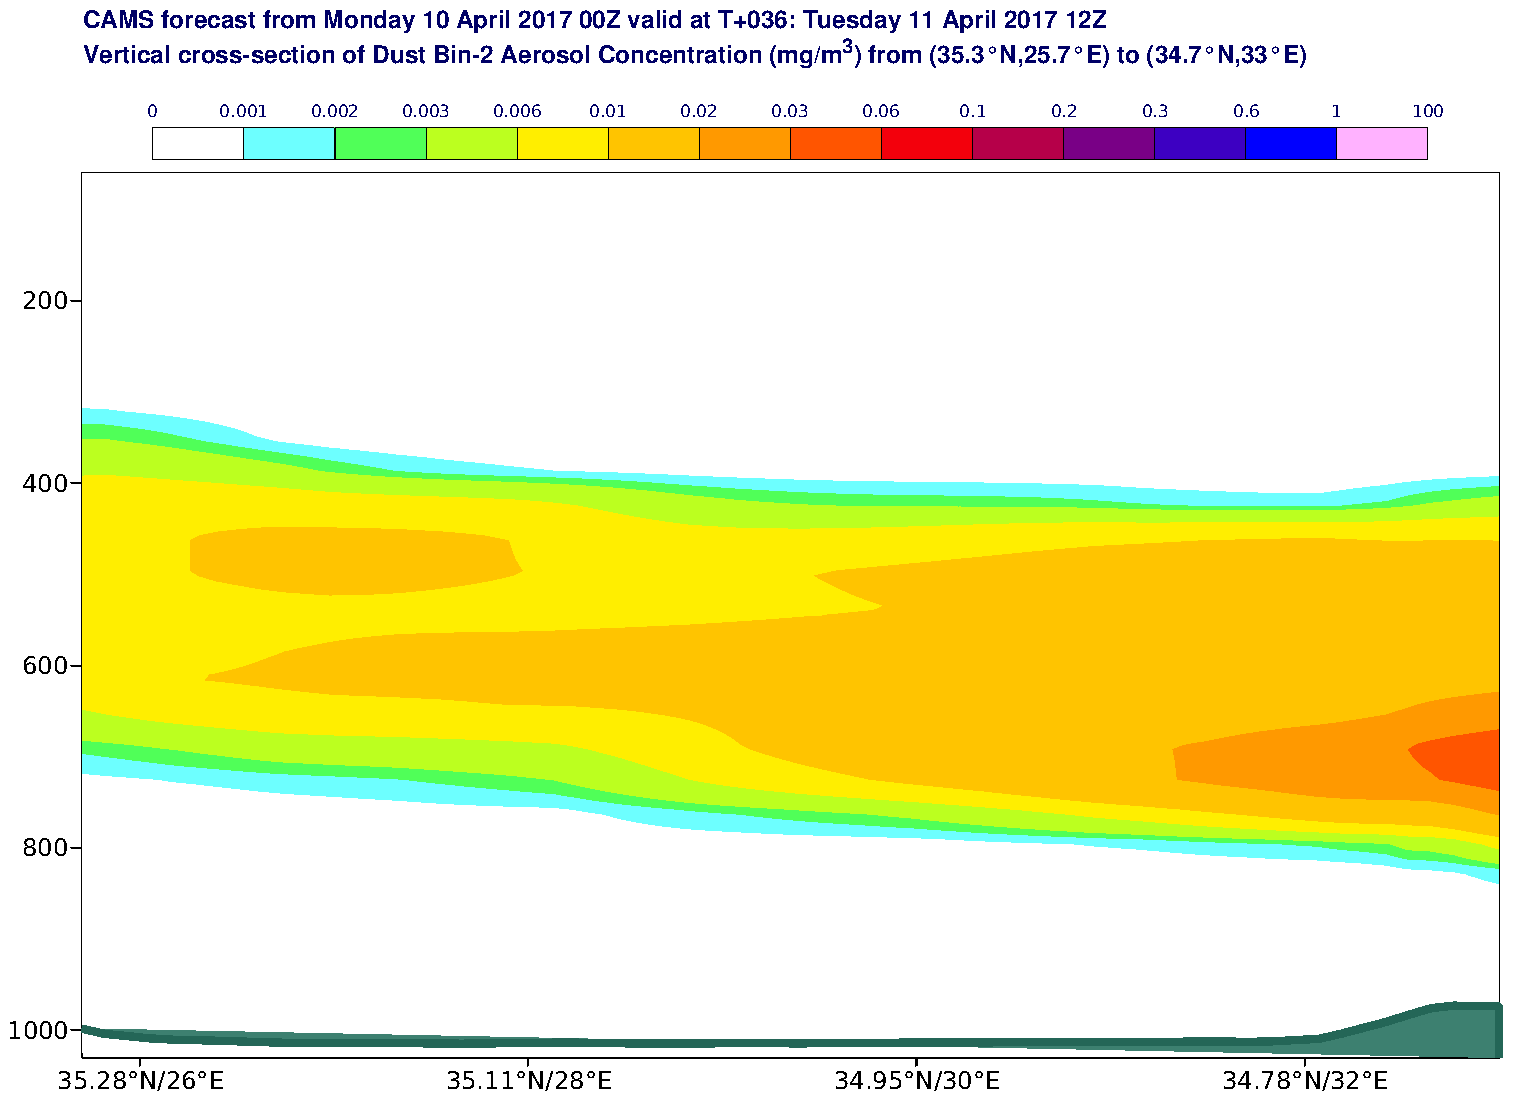 Vertical cross-section of Dust Bin-2 Aerosol Concentration (mg/m3) valid at T36 - 2017-04-11 12:00